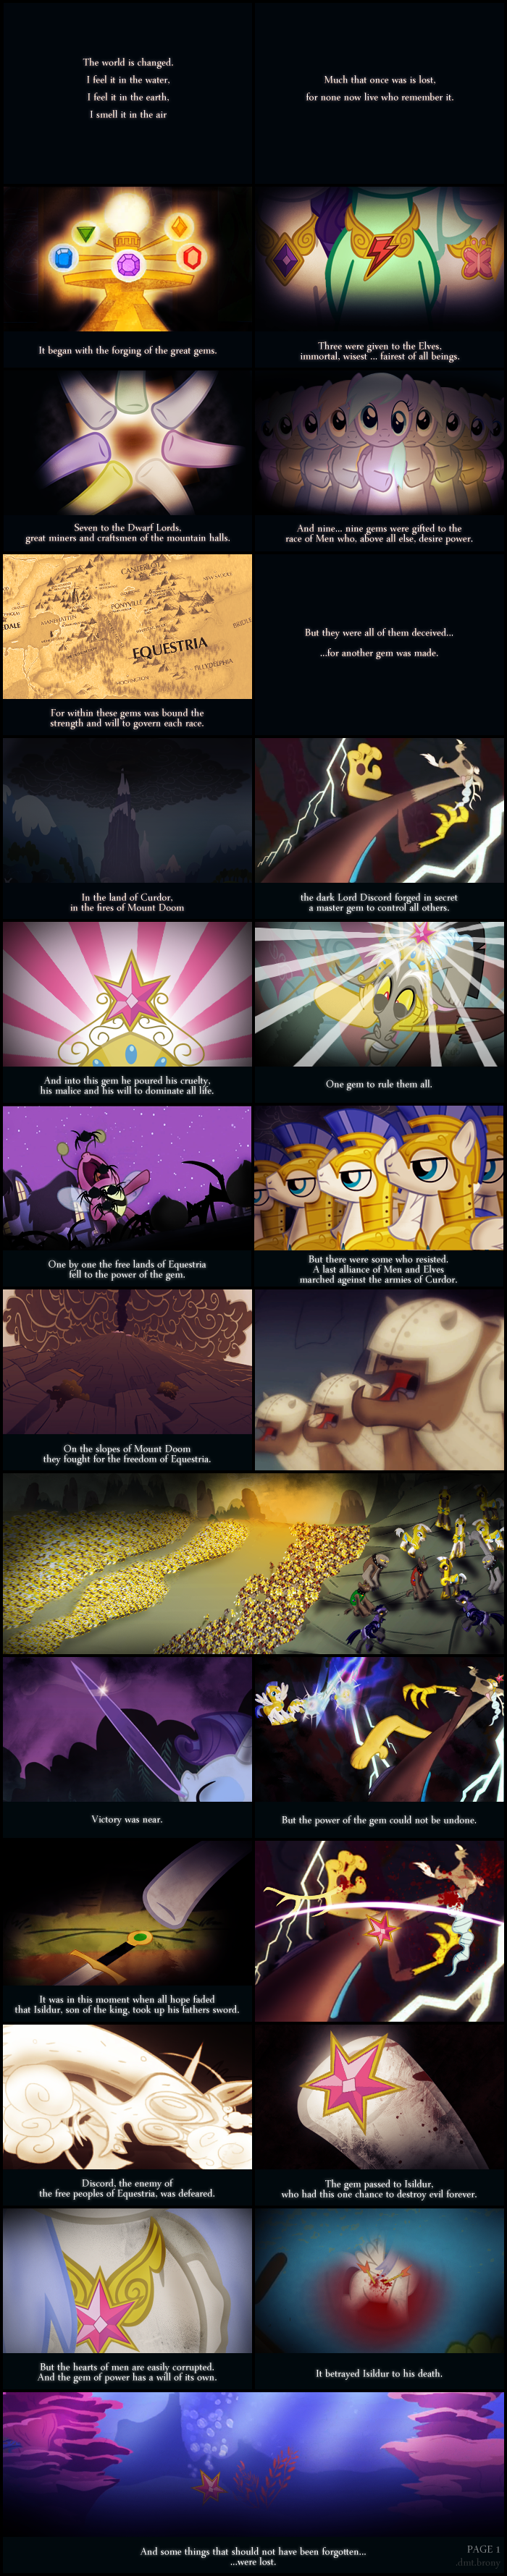 [Obrázek: lord_of_the_ponies_by_dmtbrony-d4ez4g0.png]